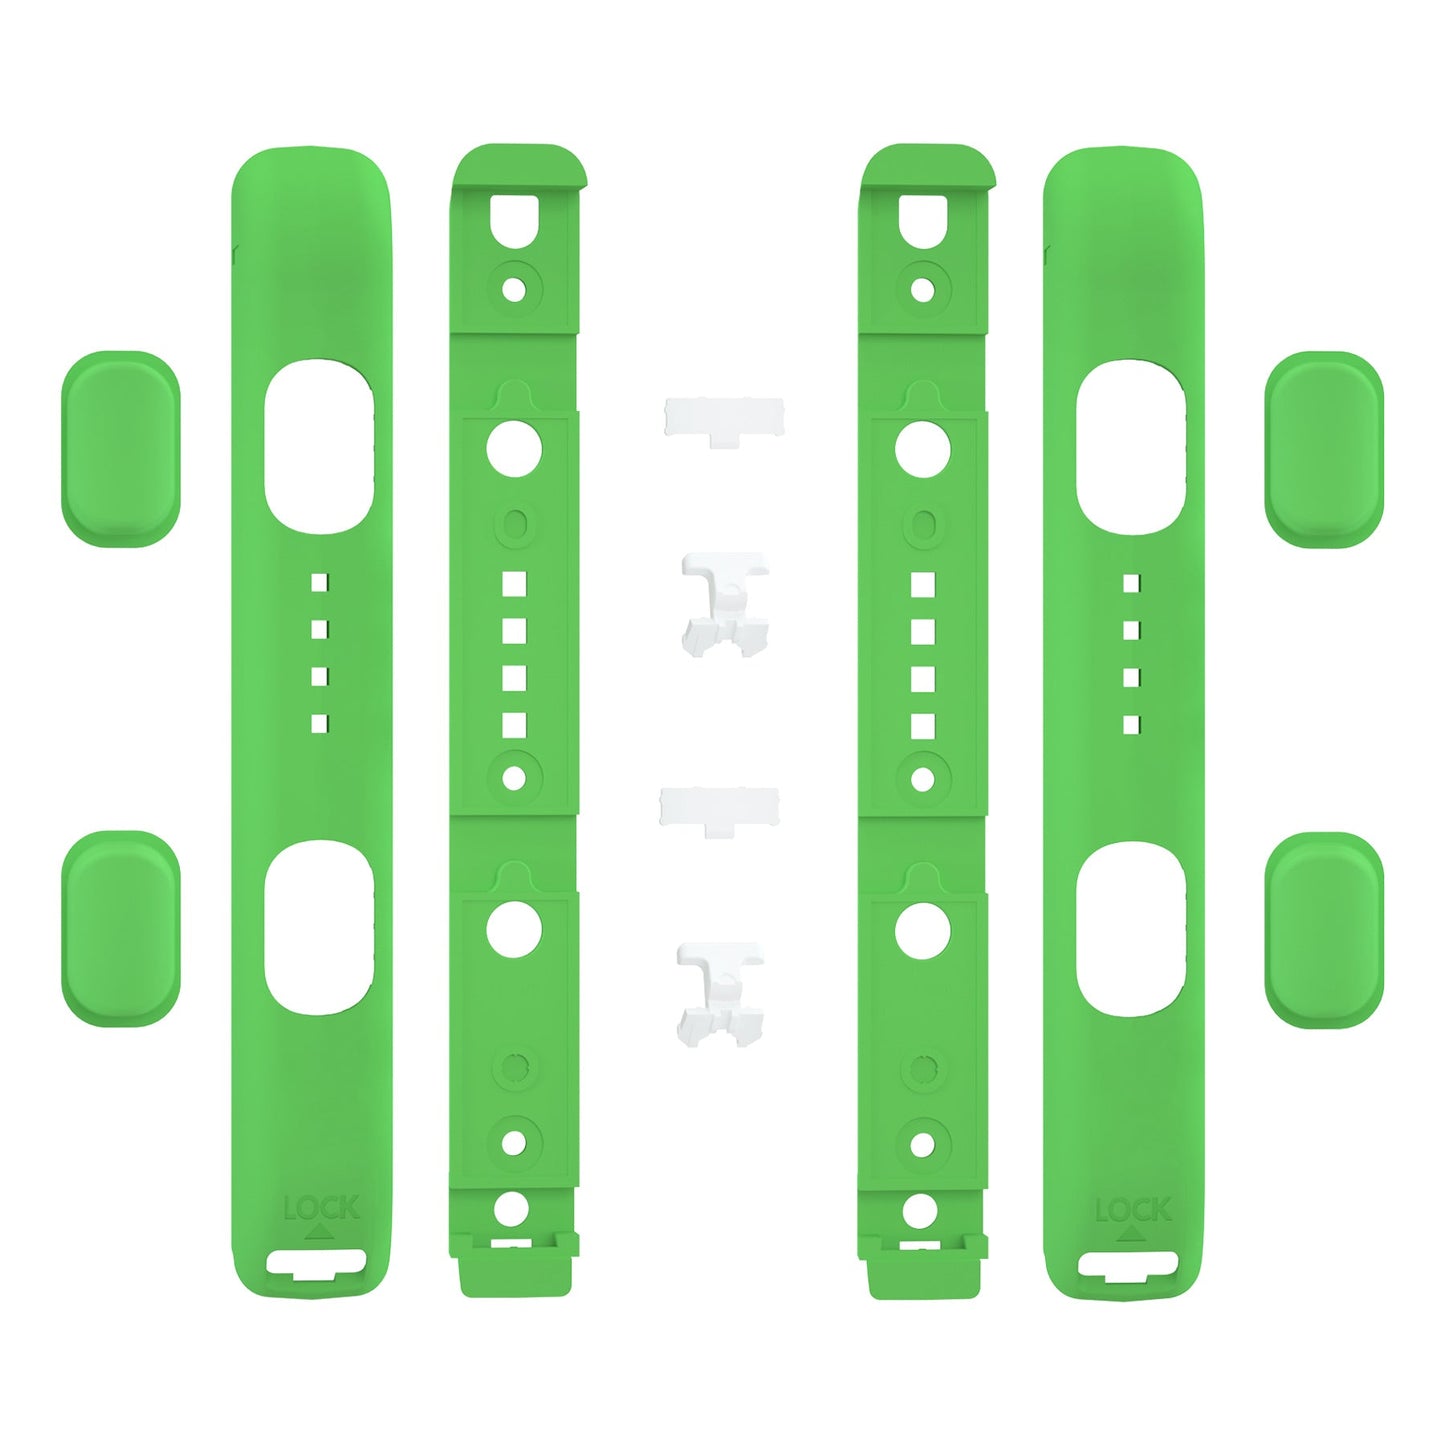 eXtremeRate Retail Green Soft Touch Replacement shell for NS Switch Joycon Strap, Custom Joy-Con Wrist Strap Housing Buttons for NS Switch - 2 Pack - UEP312